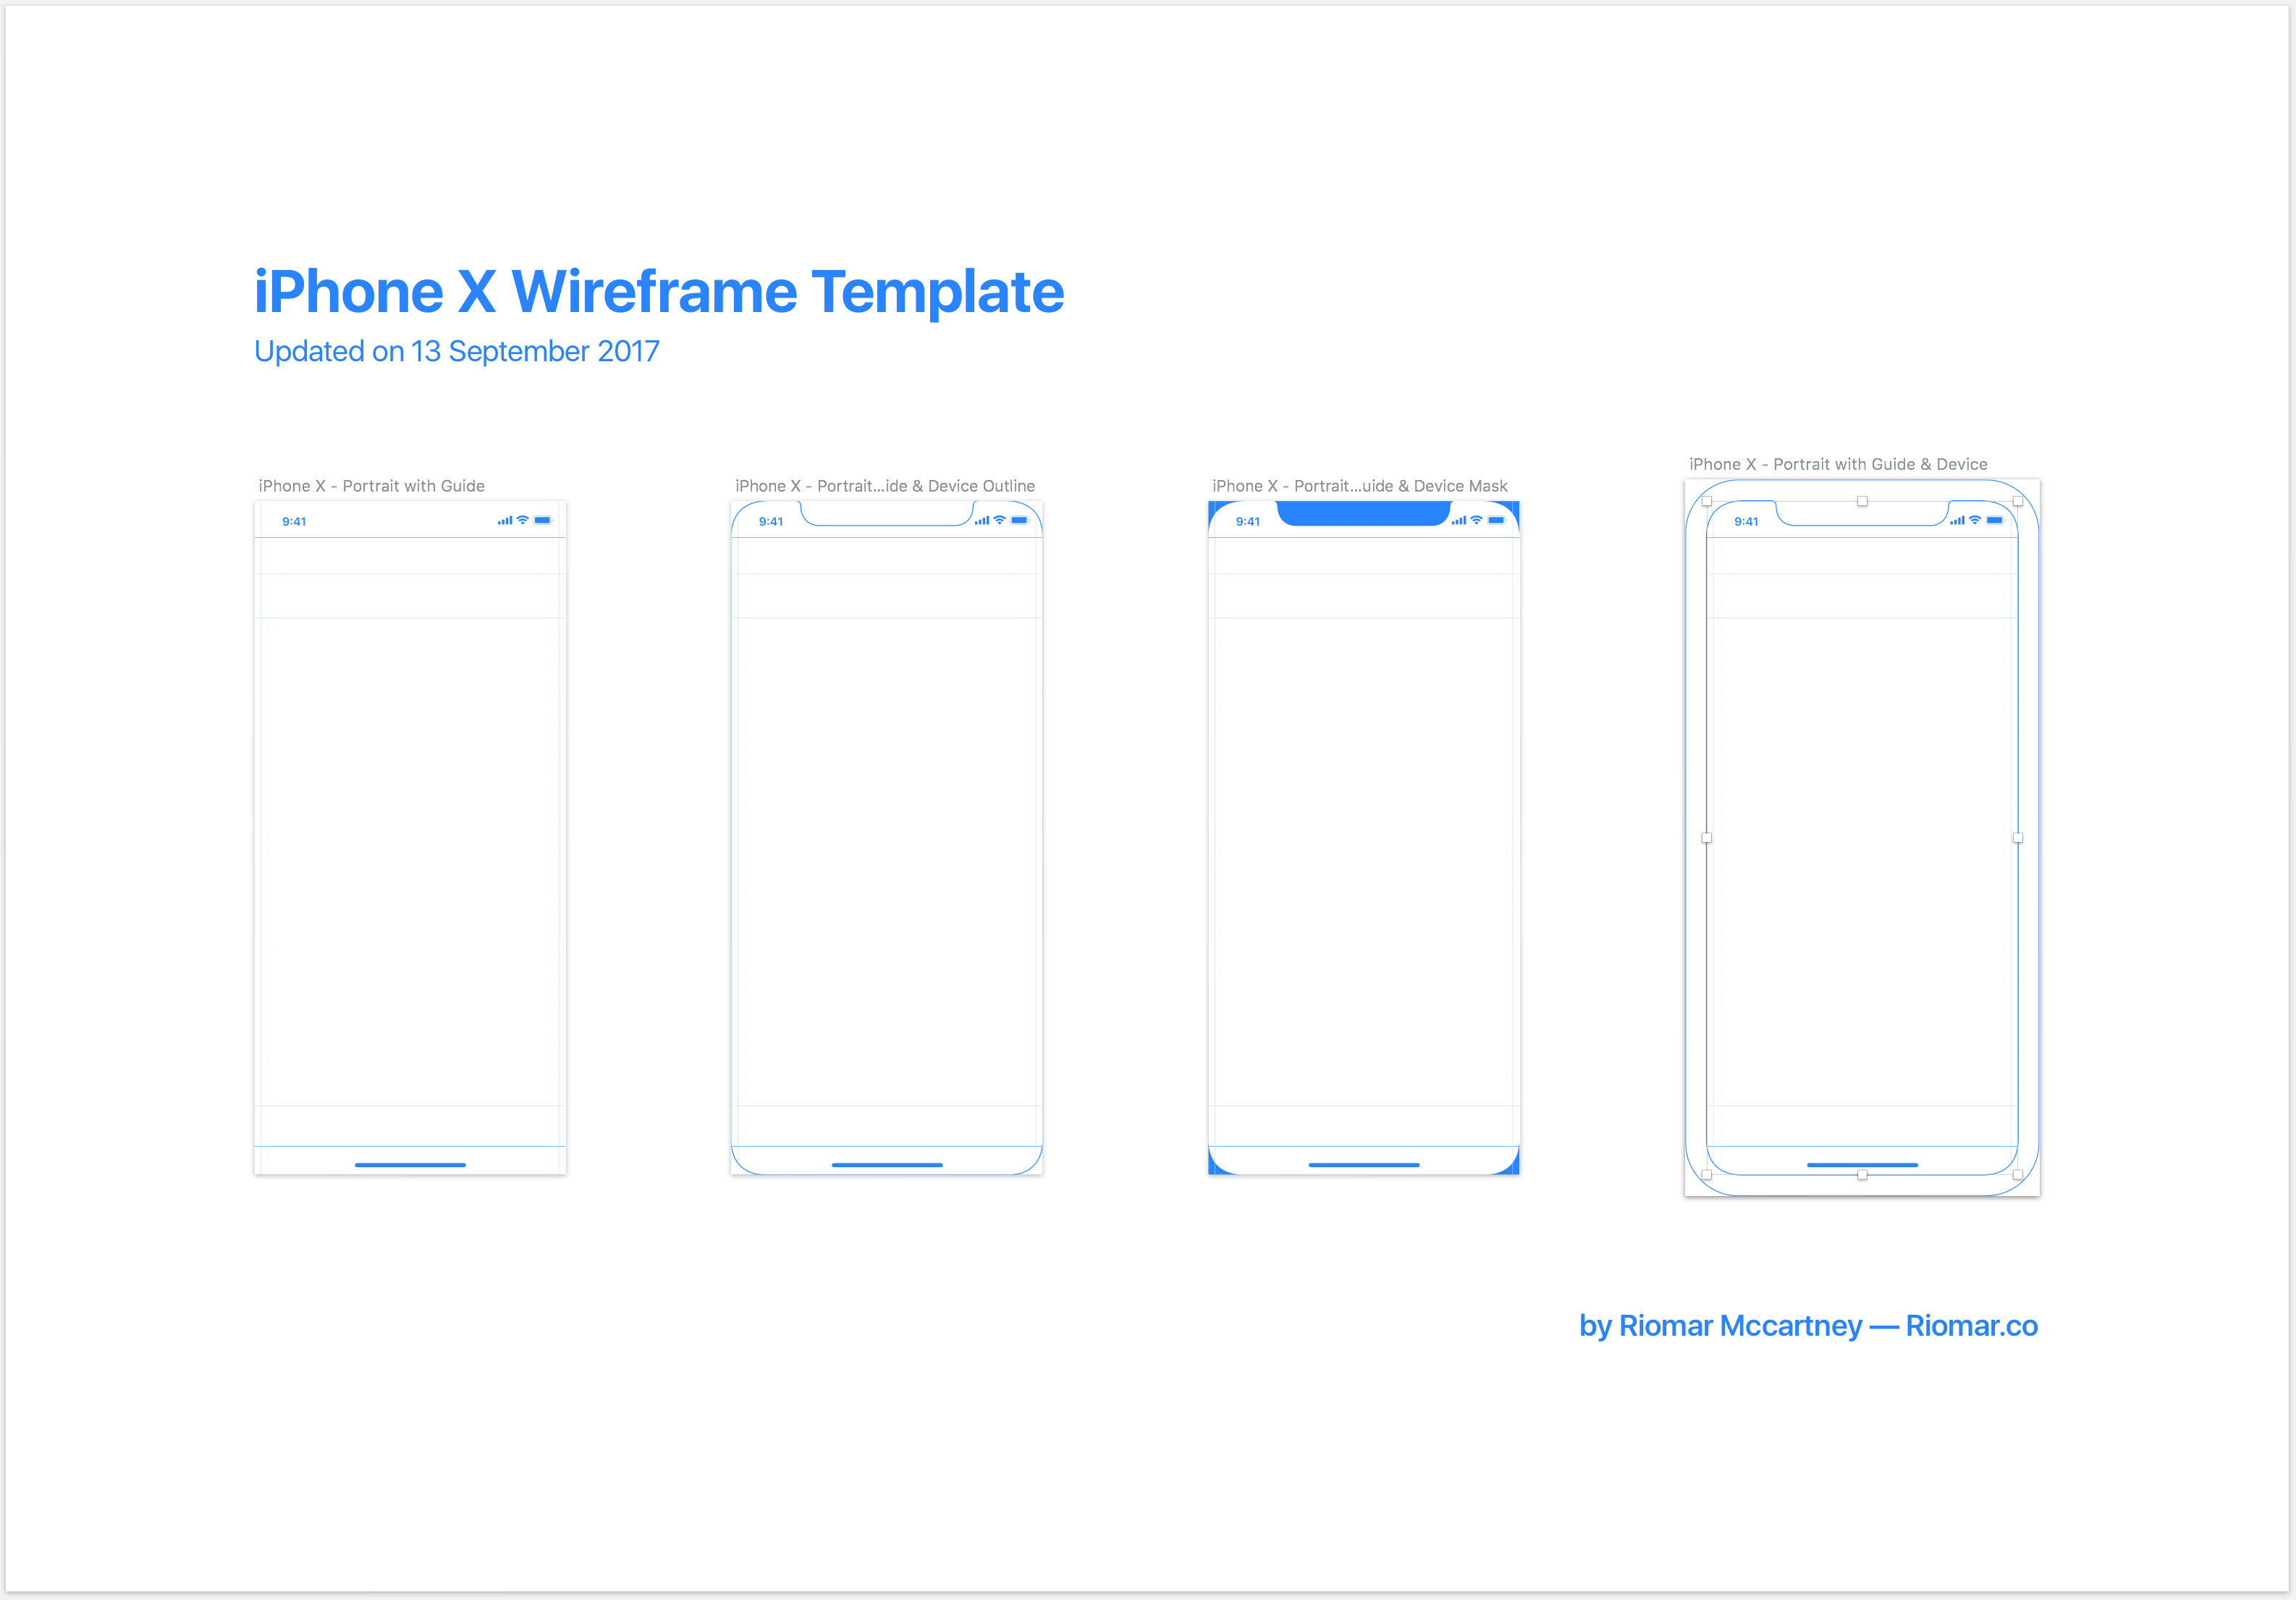 iPhone X Wireframe with iOS 11 Guides